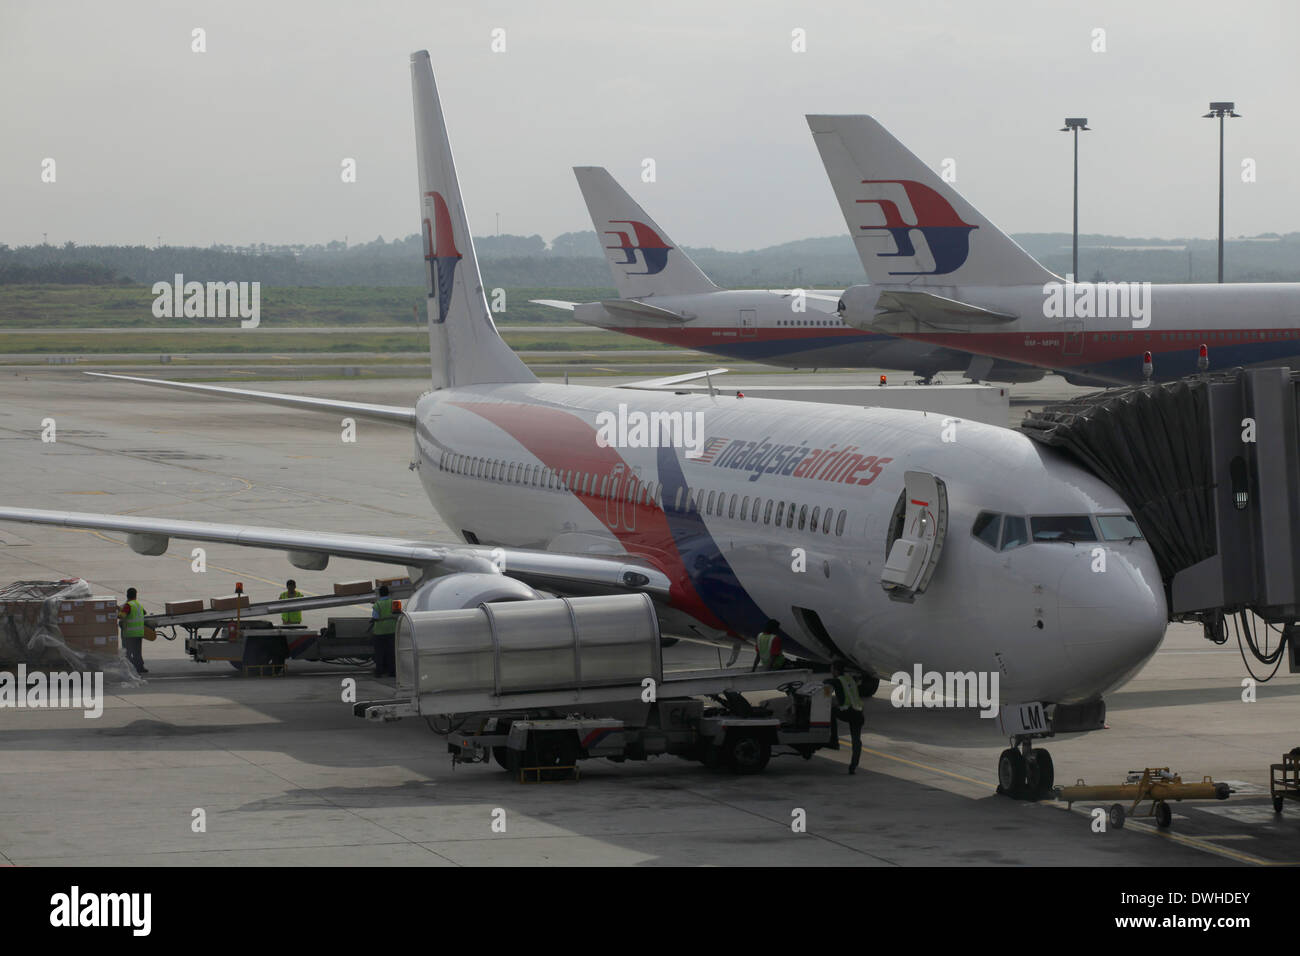 Malaysian Airlines airplanes at Kuala Lumpur airport in Malaysia Stock Photo